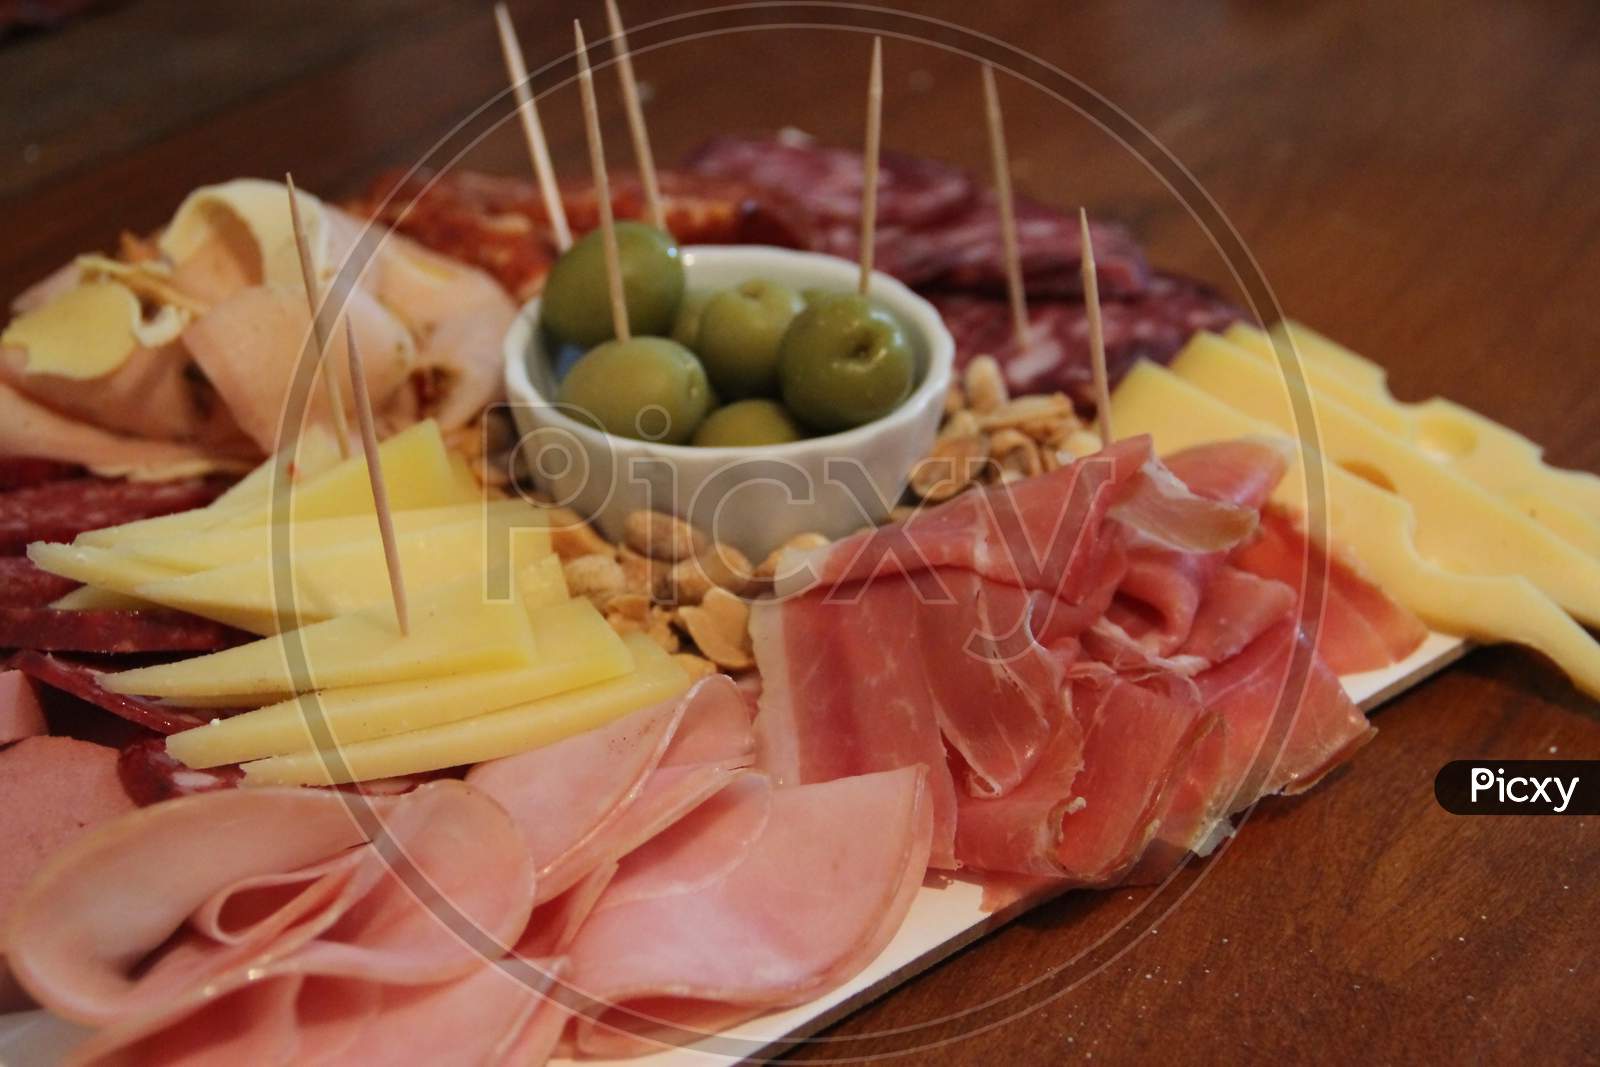 Chopped Table Of Cold Cuts With Beer